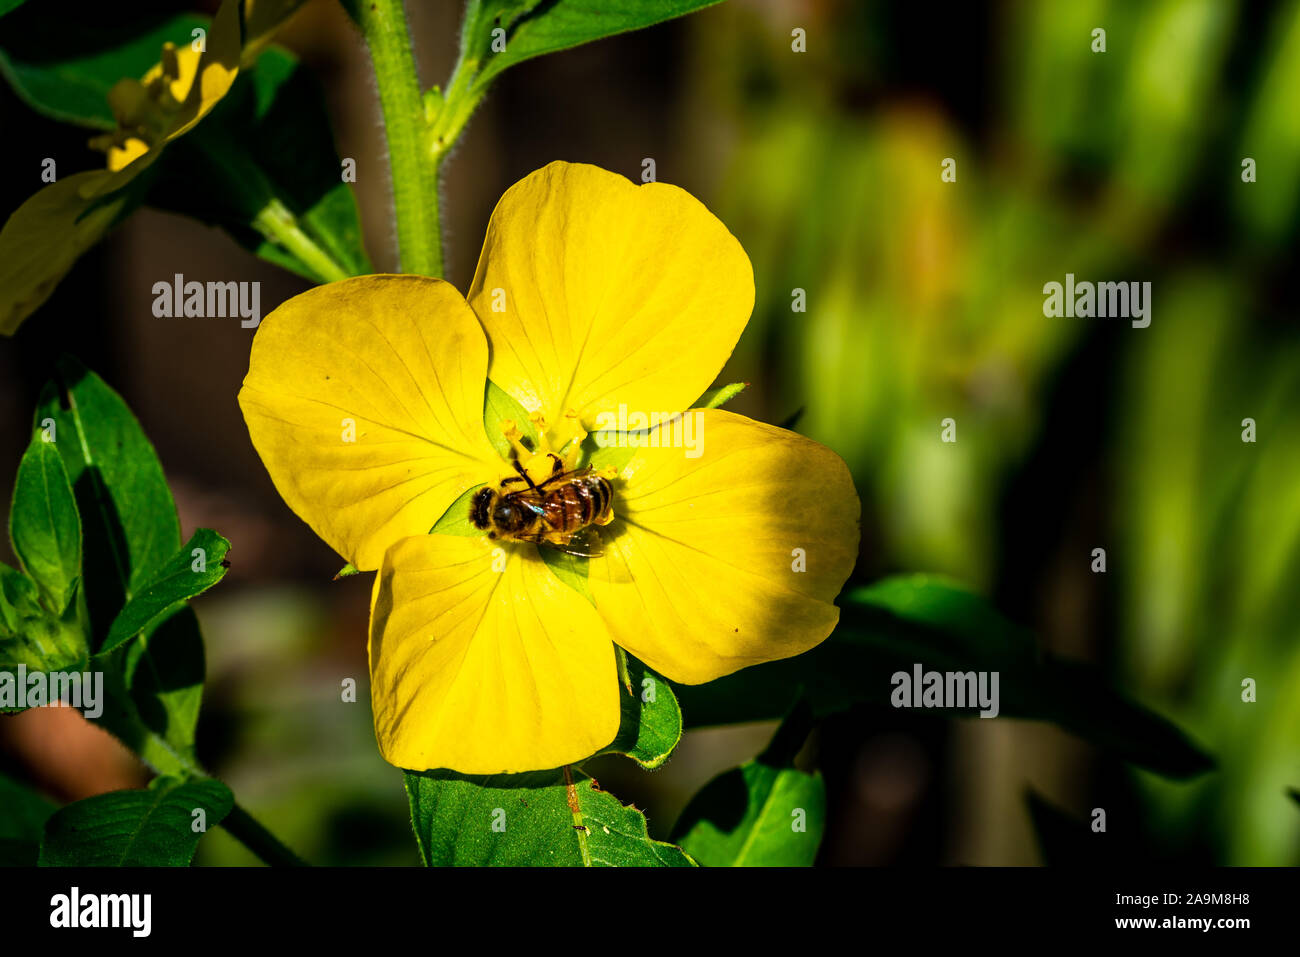 A honey bee getting some pollen from a beautiful yellow flower. Stock Photo